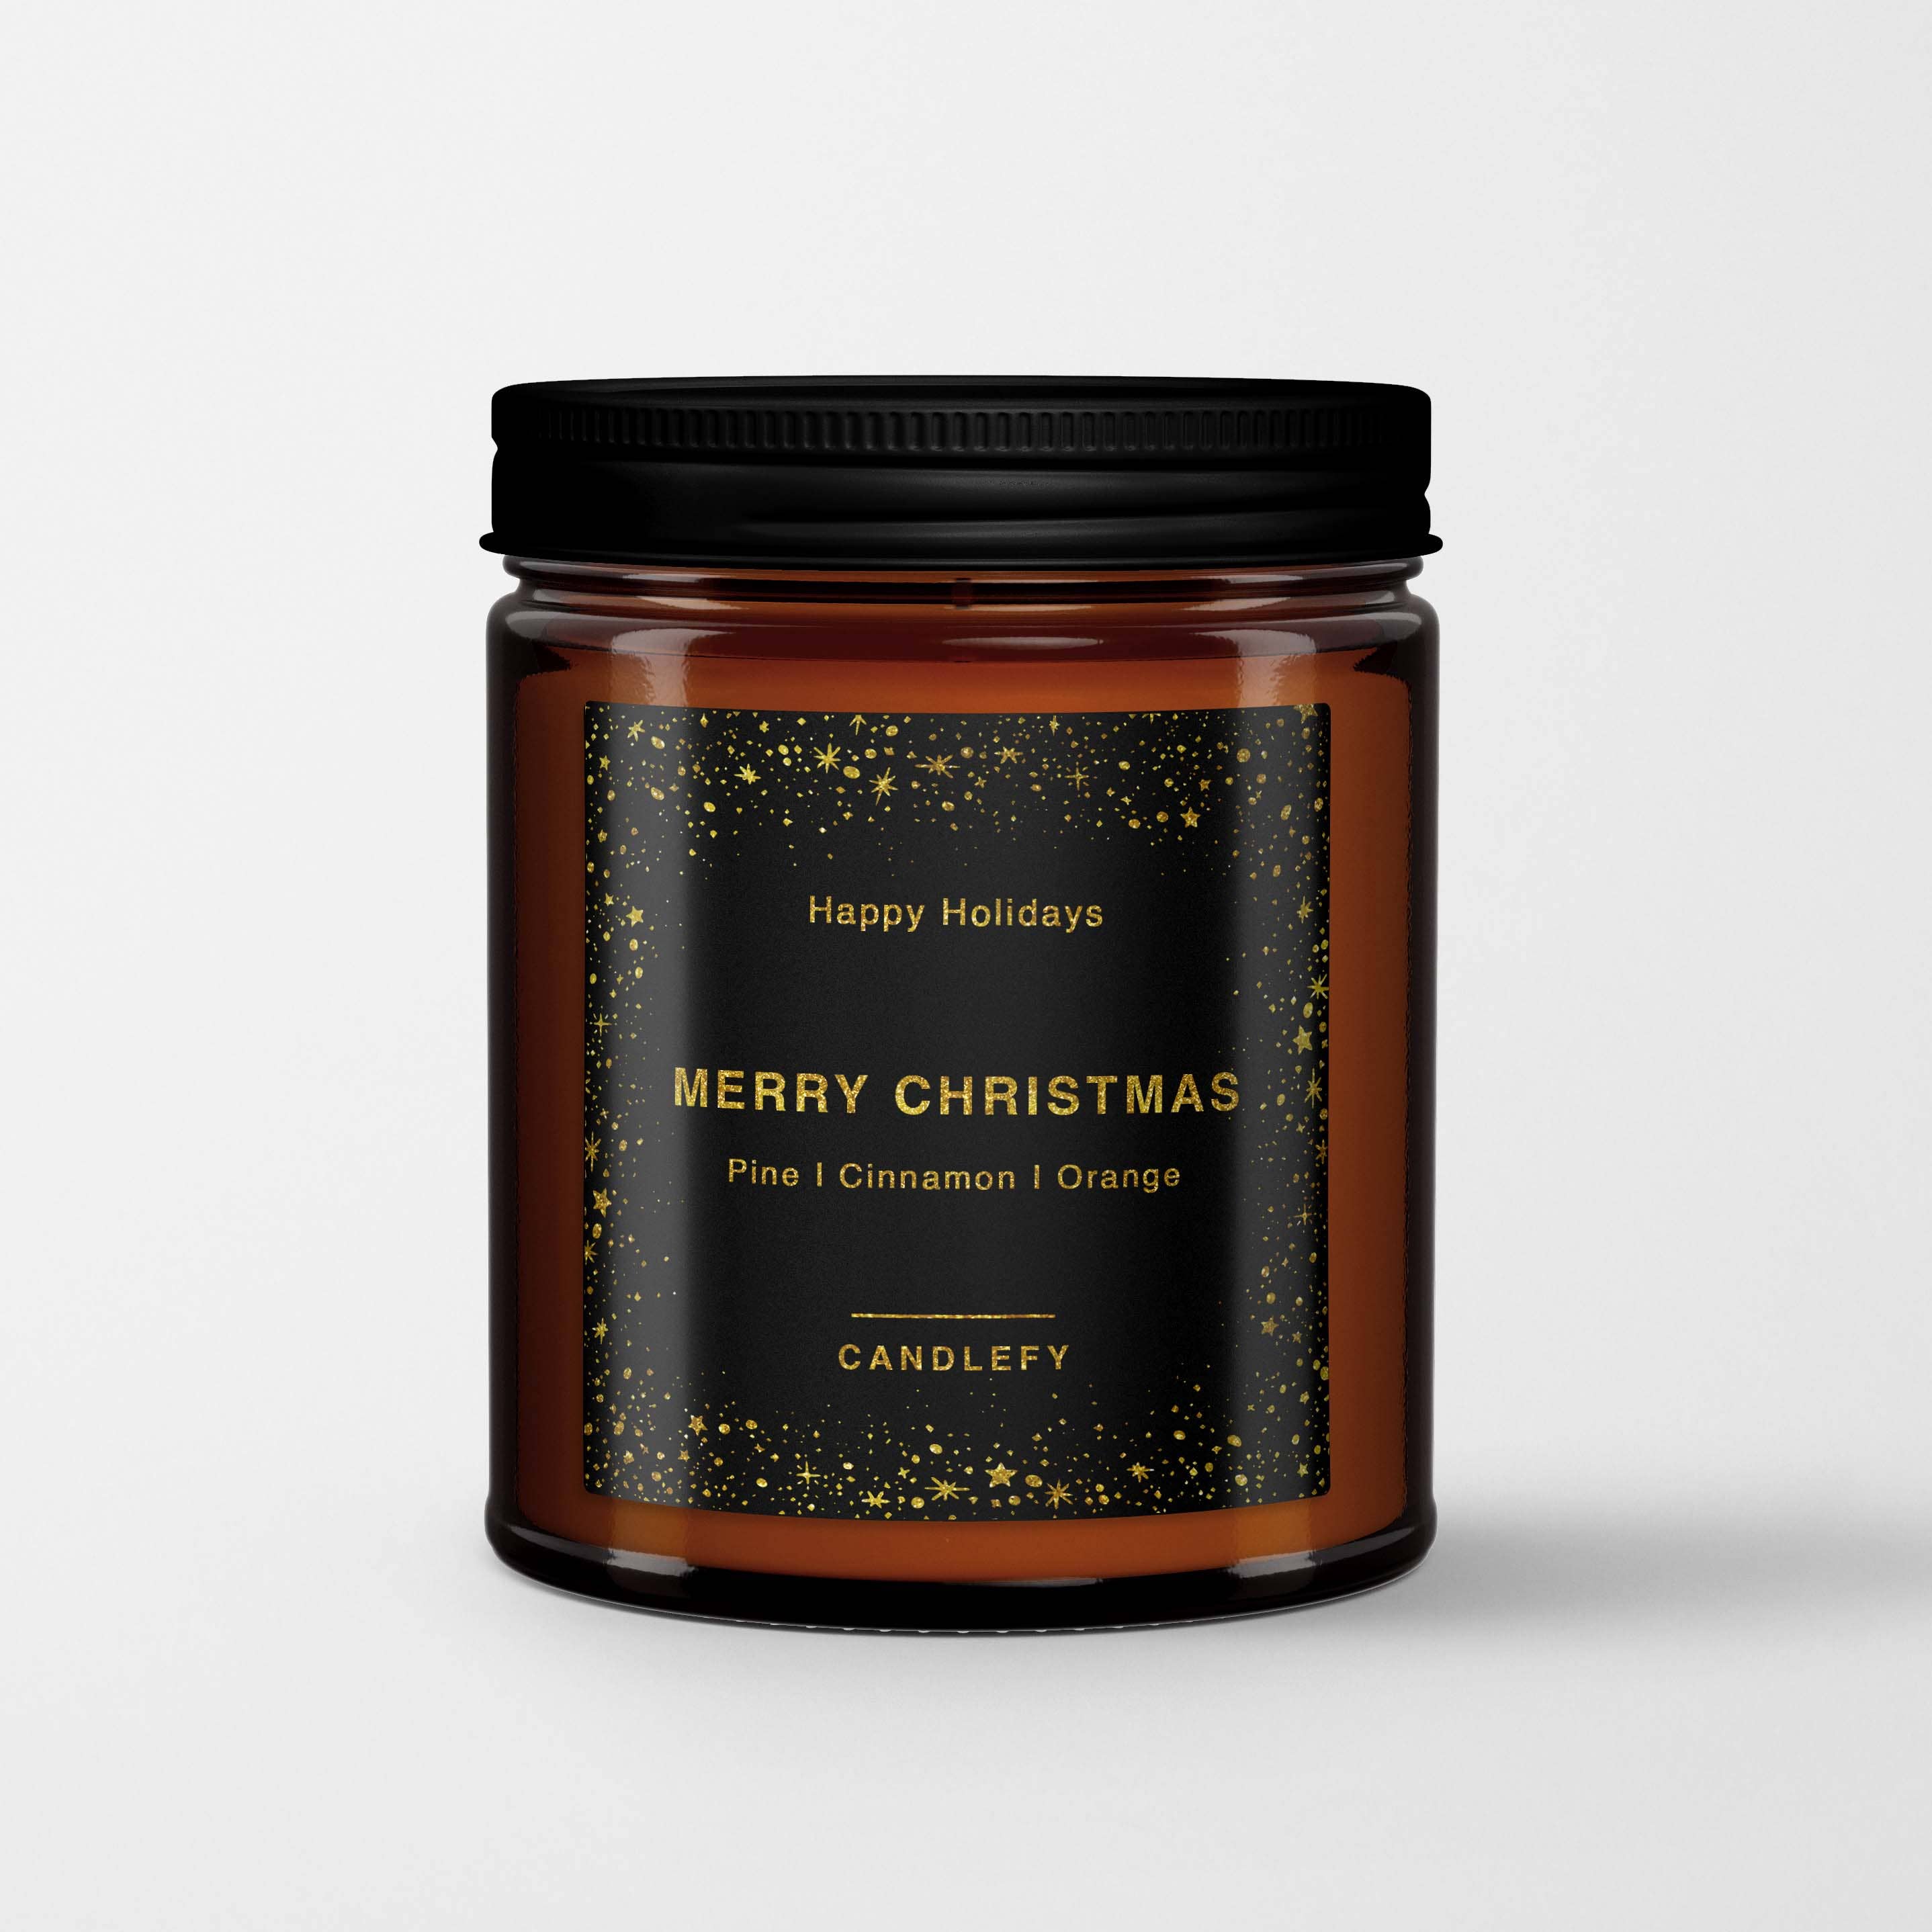 Merry Christmas Candlefy candle 